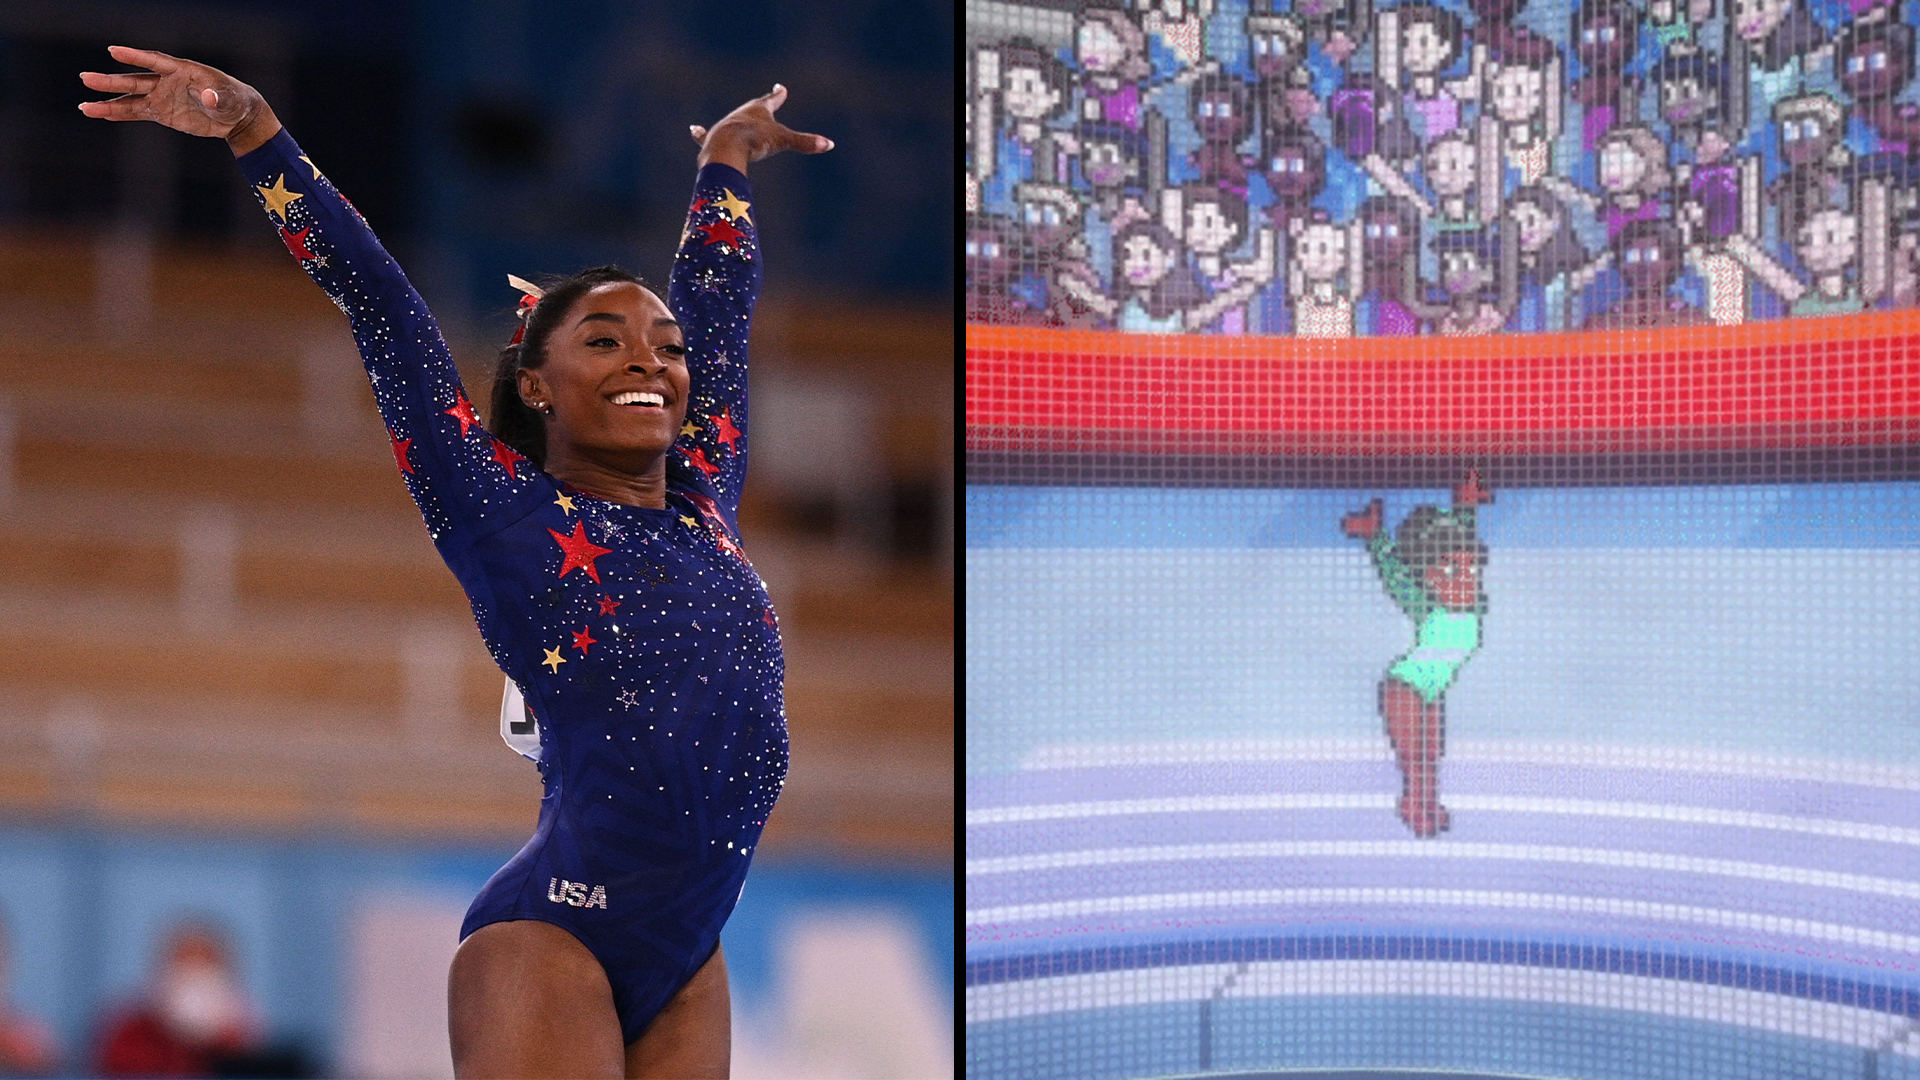 After Her Debut NFT Collection Sold Out Within Minutes, Simone Biles Is Back With Her Most Iconic Moves